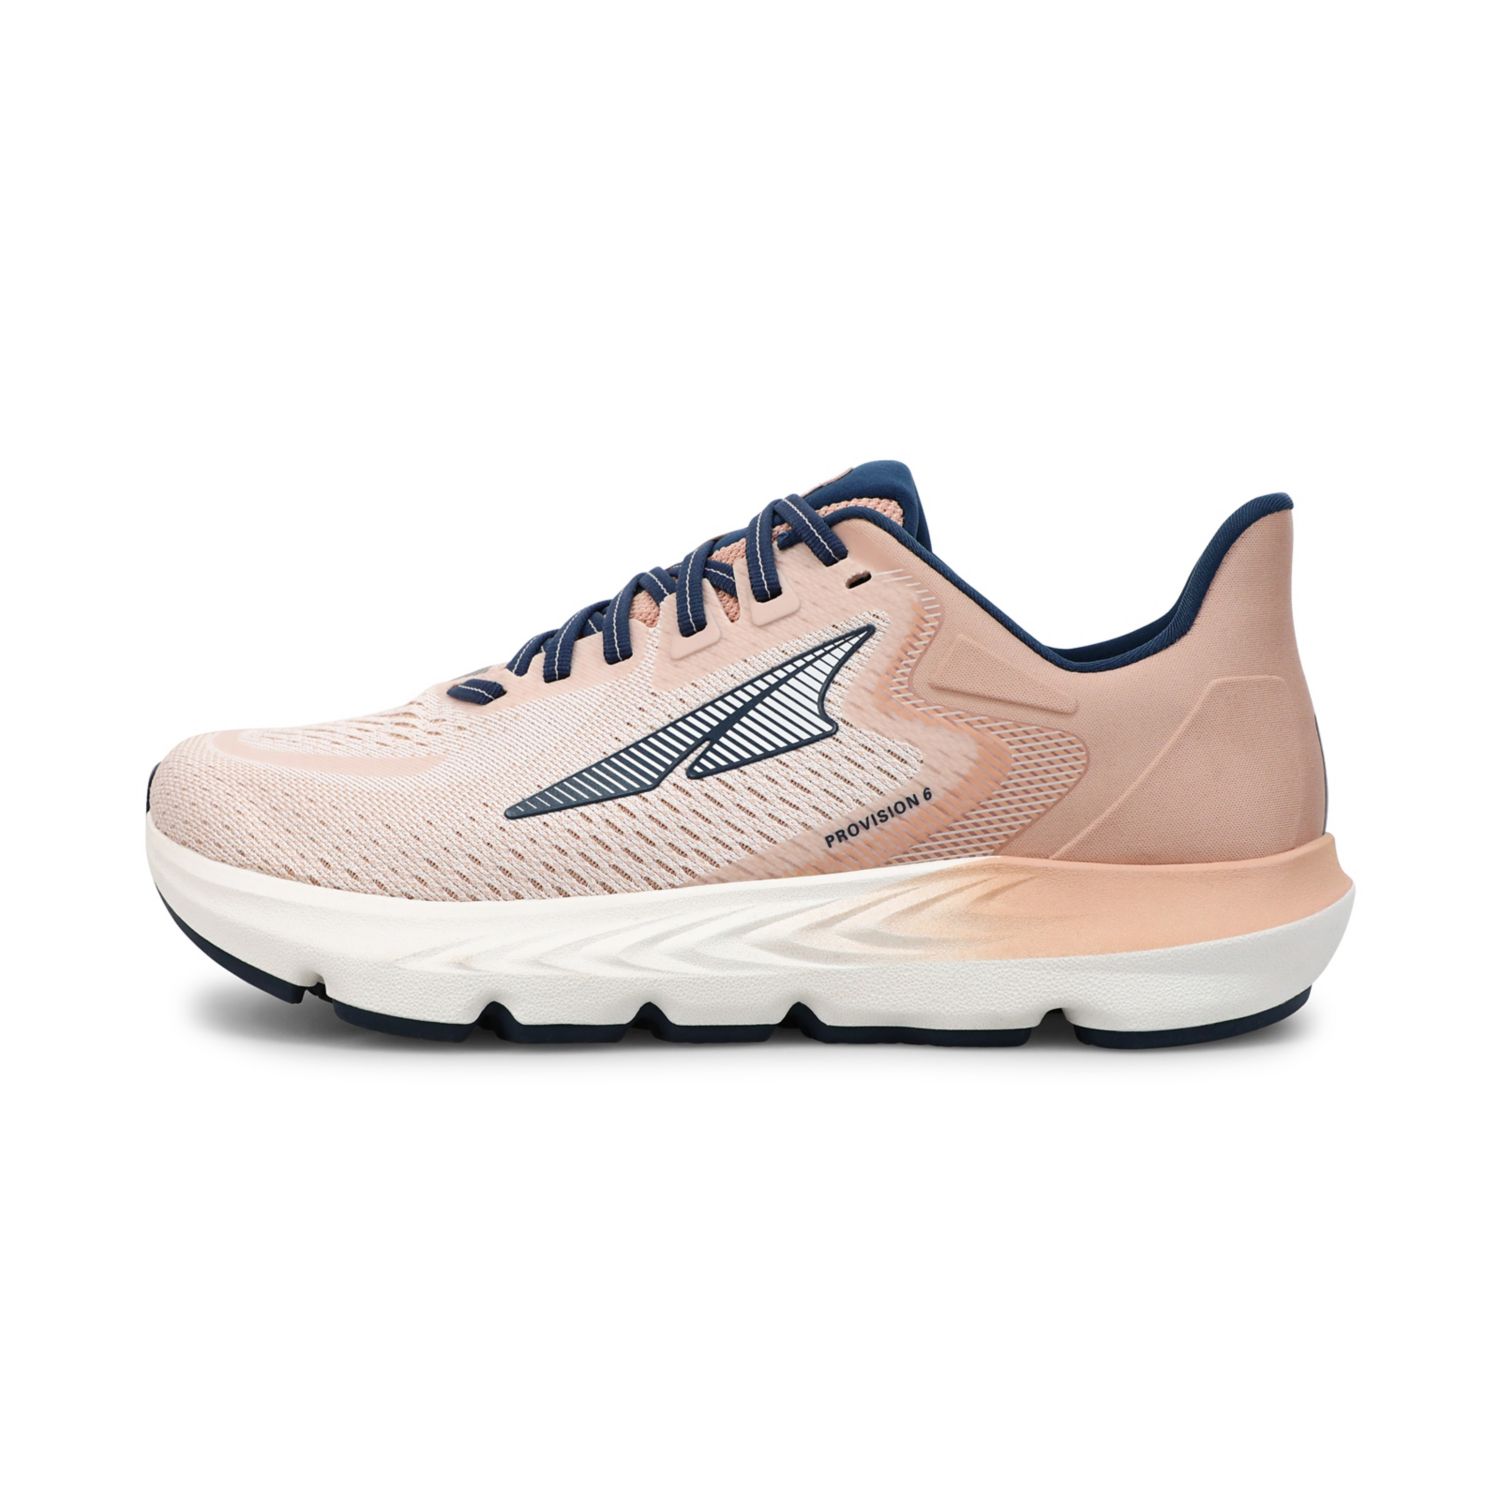 Pink Altra Provision 6 Women's Road Running Shoes | Ireland-83506299